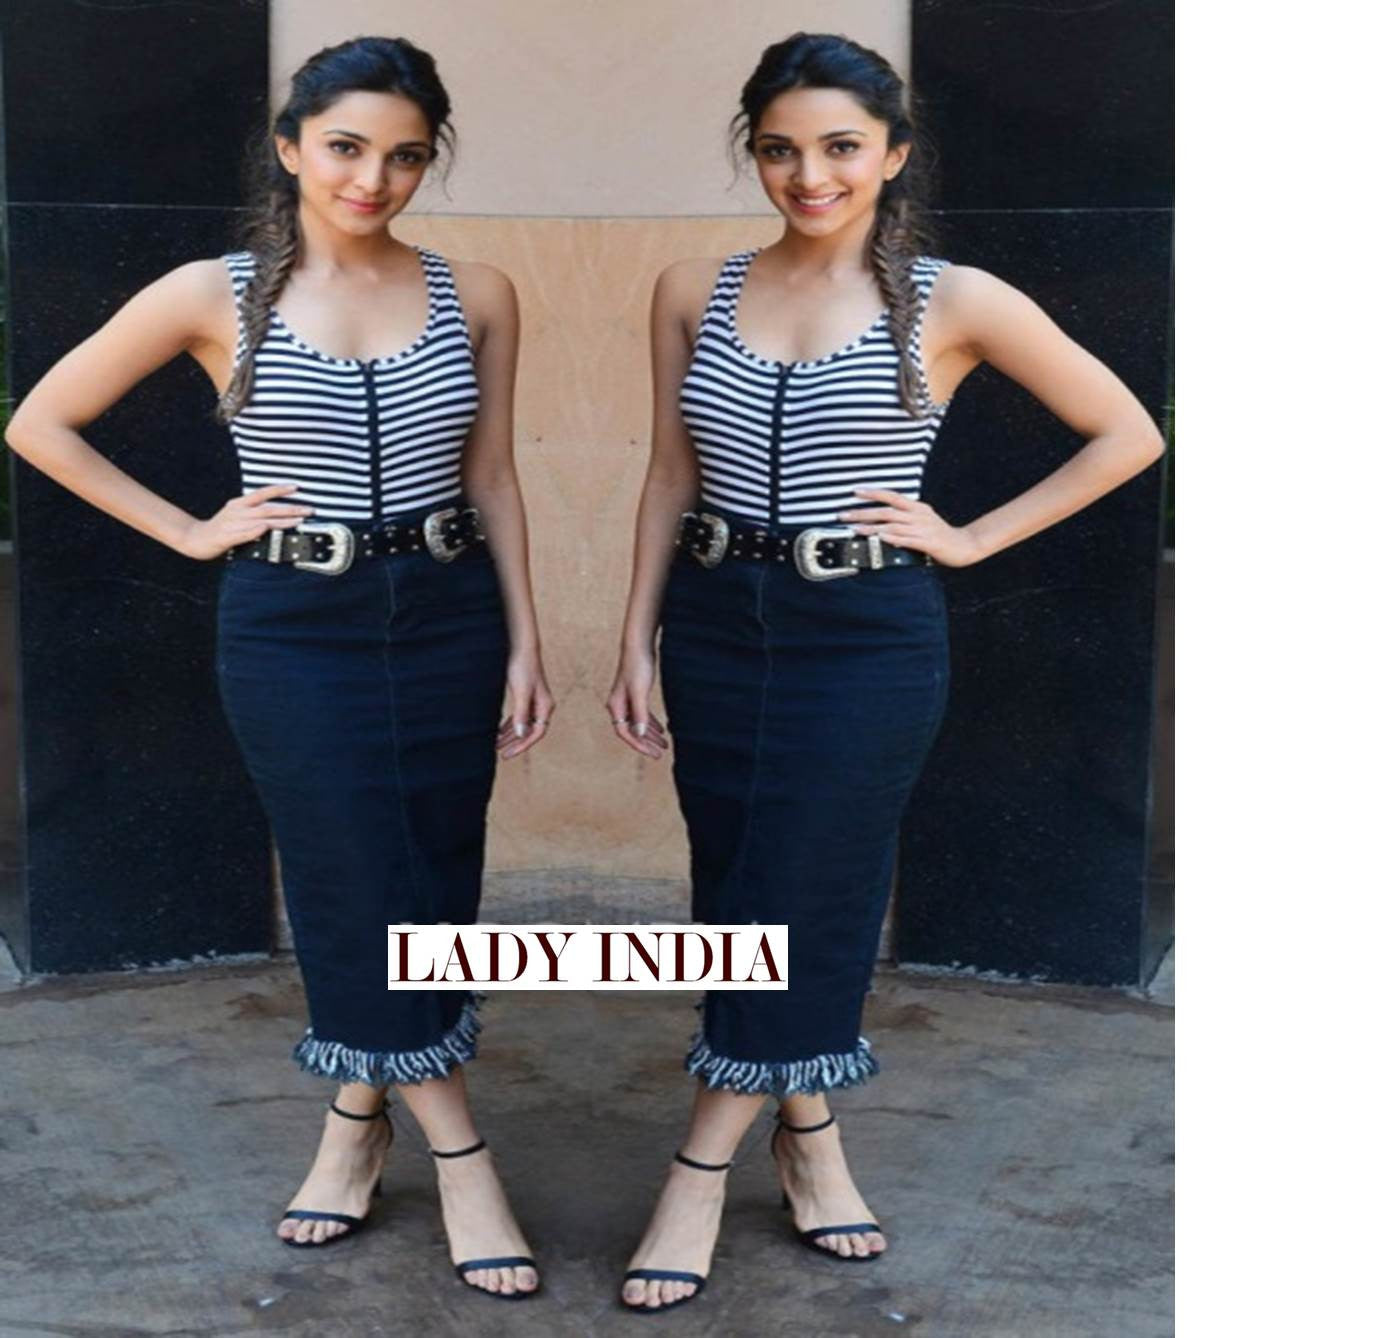 Kiara Advani in striped tank top featuring a front zipper and a threaded navy blue skirt